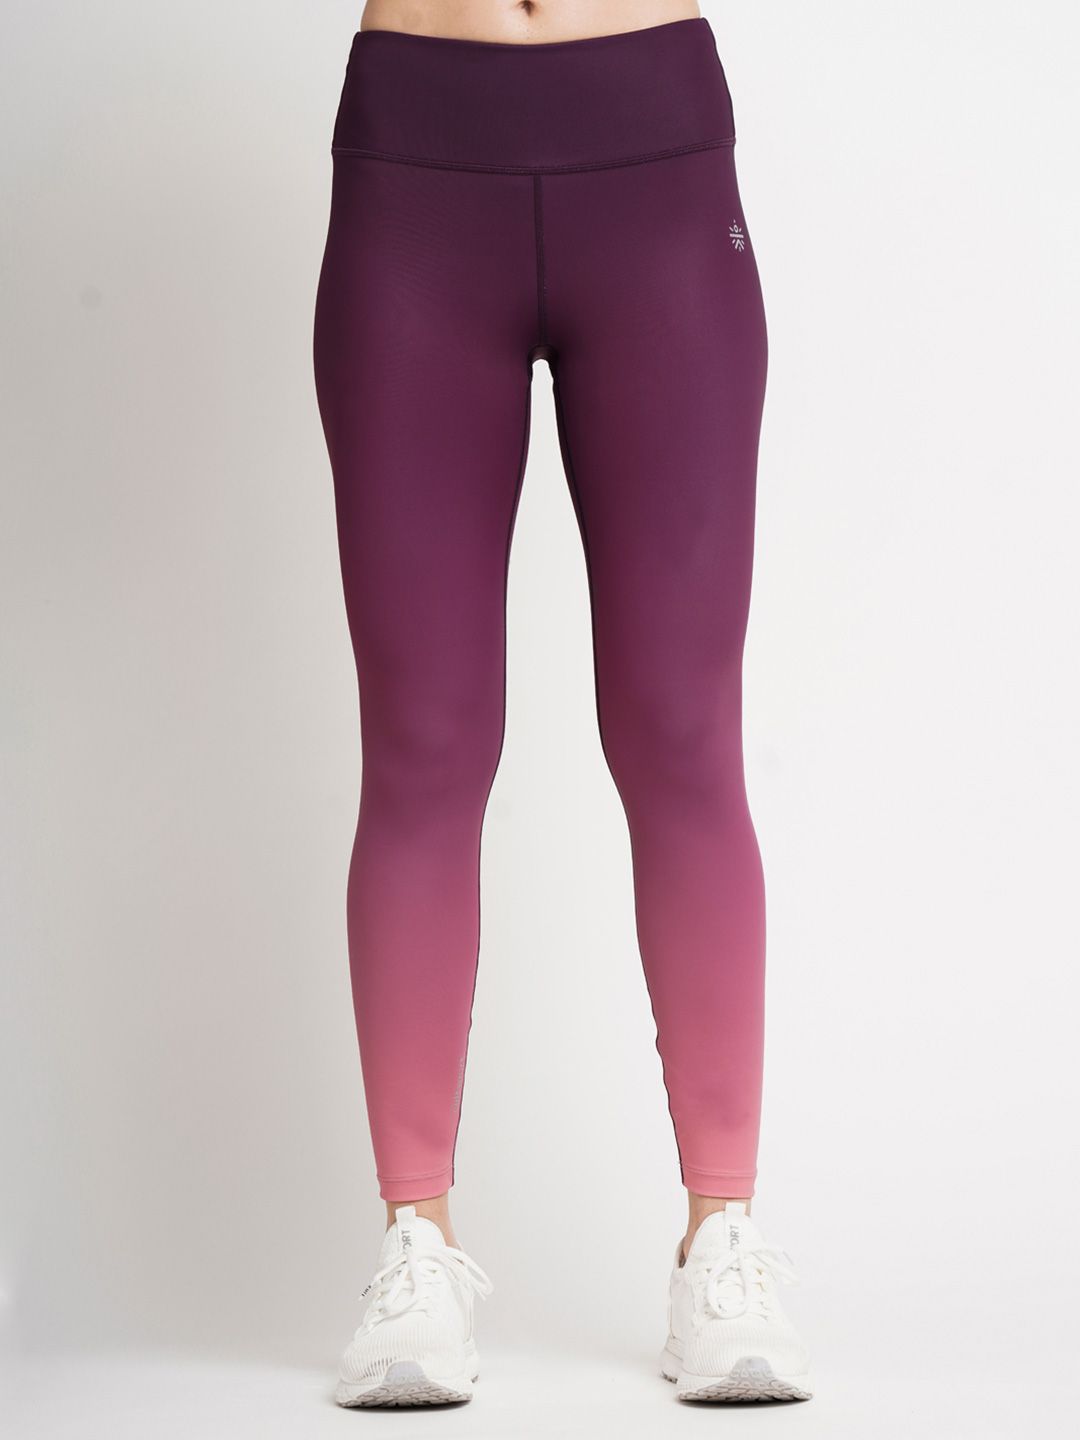 Cultsport Women Burgundy Solid Tights Price in India